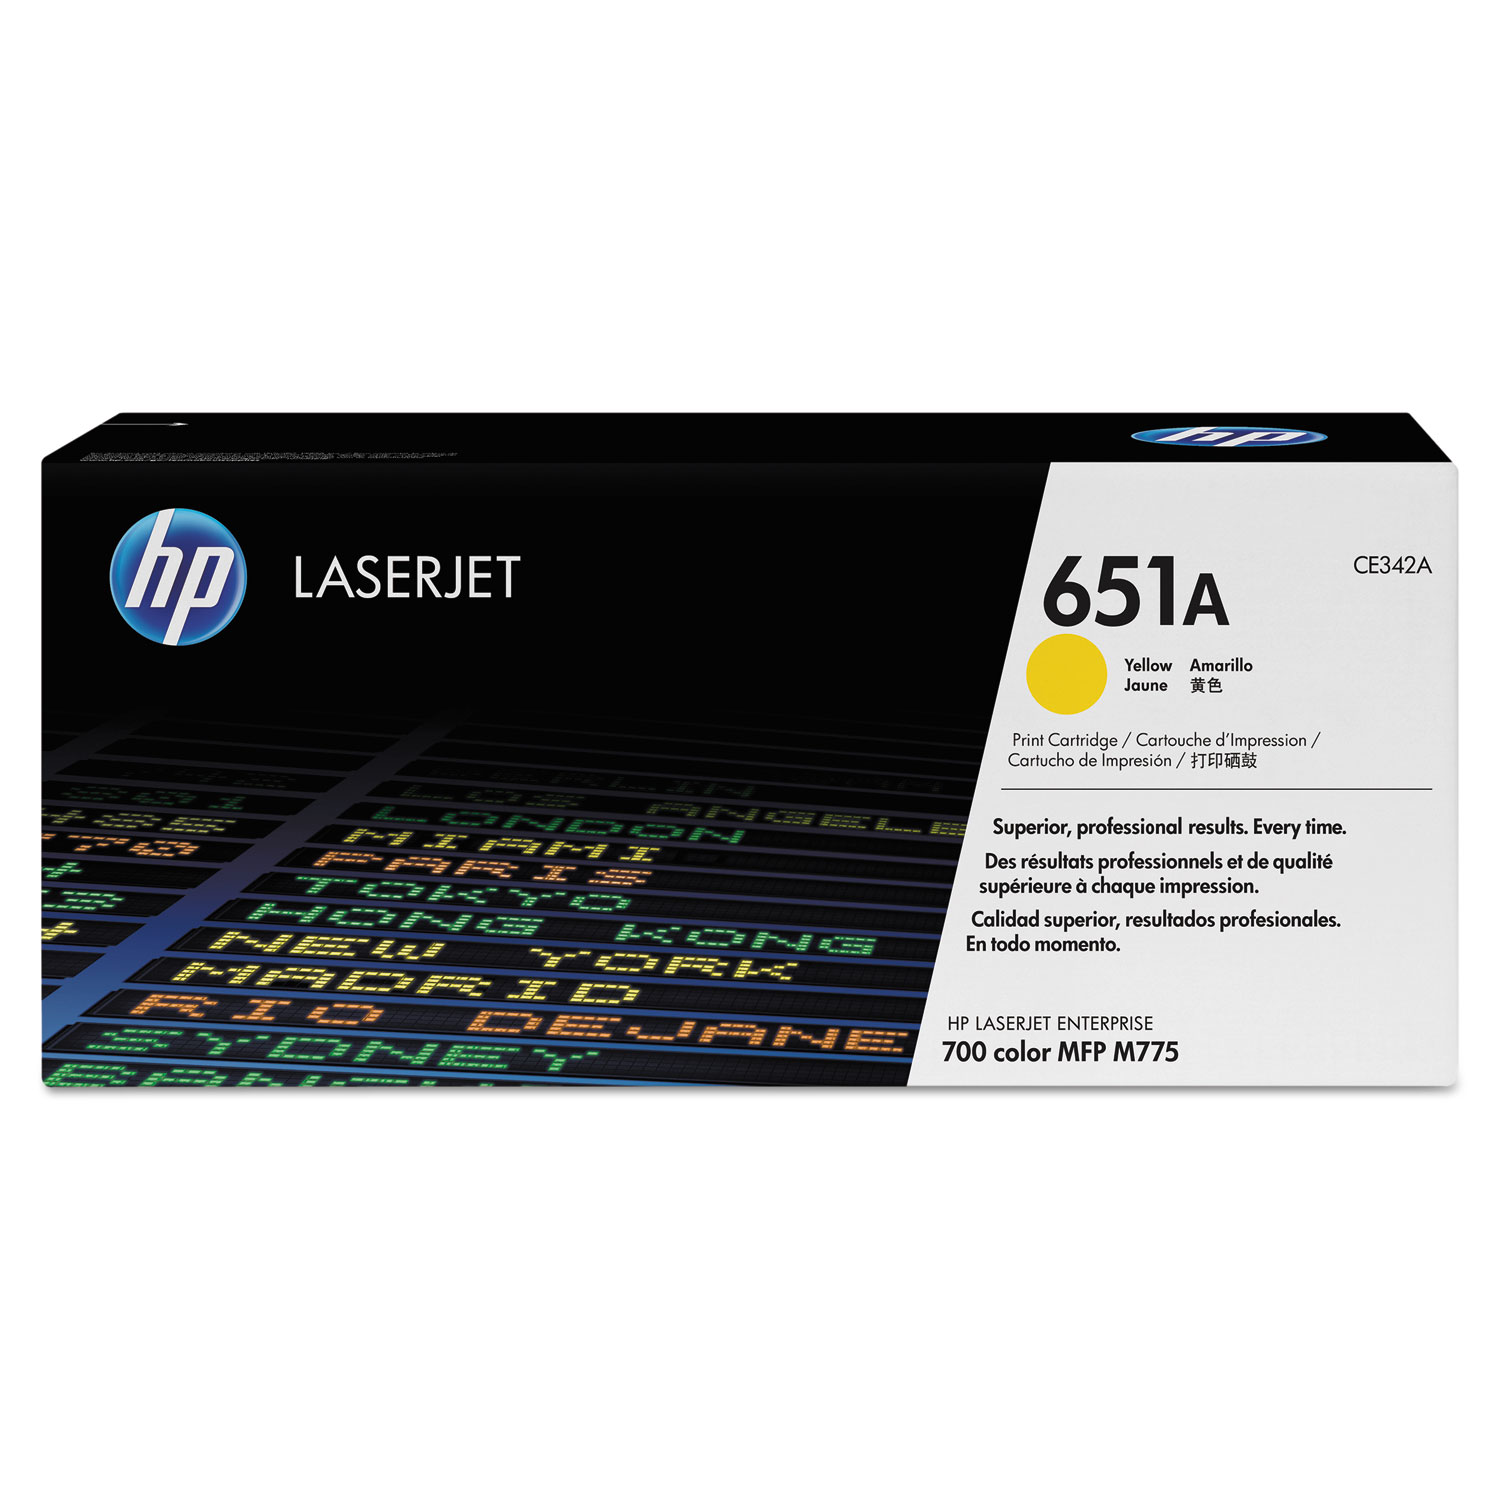  HP CE342AG HP 651A, (CE342A-G) Yellow Original LaserJet Toner Cartridge for US Government (HEWCE342AG) 